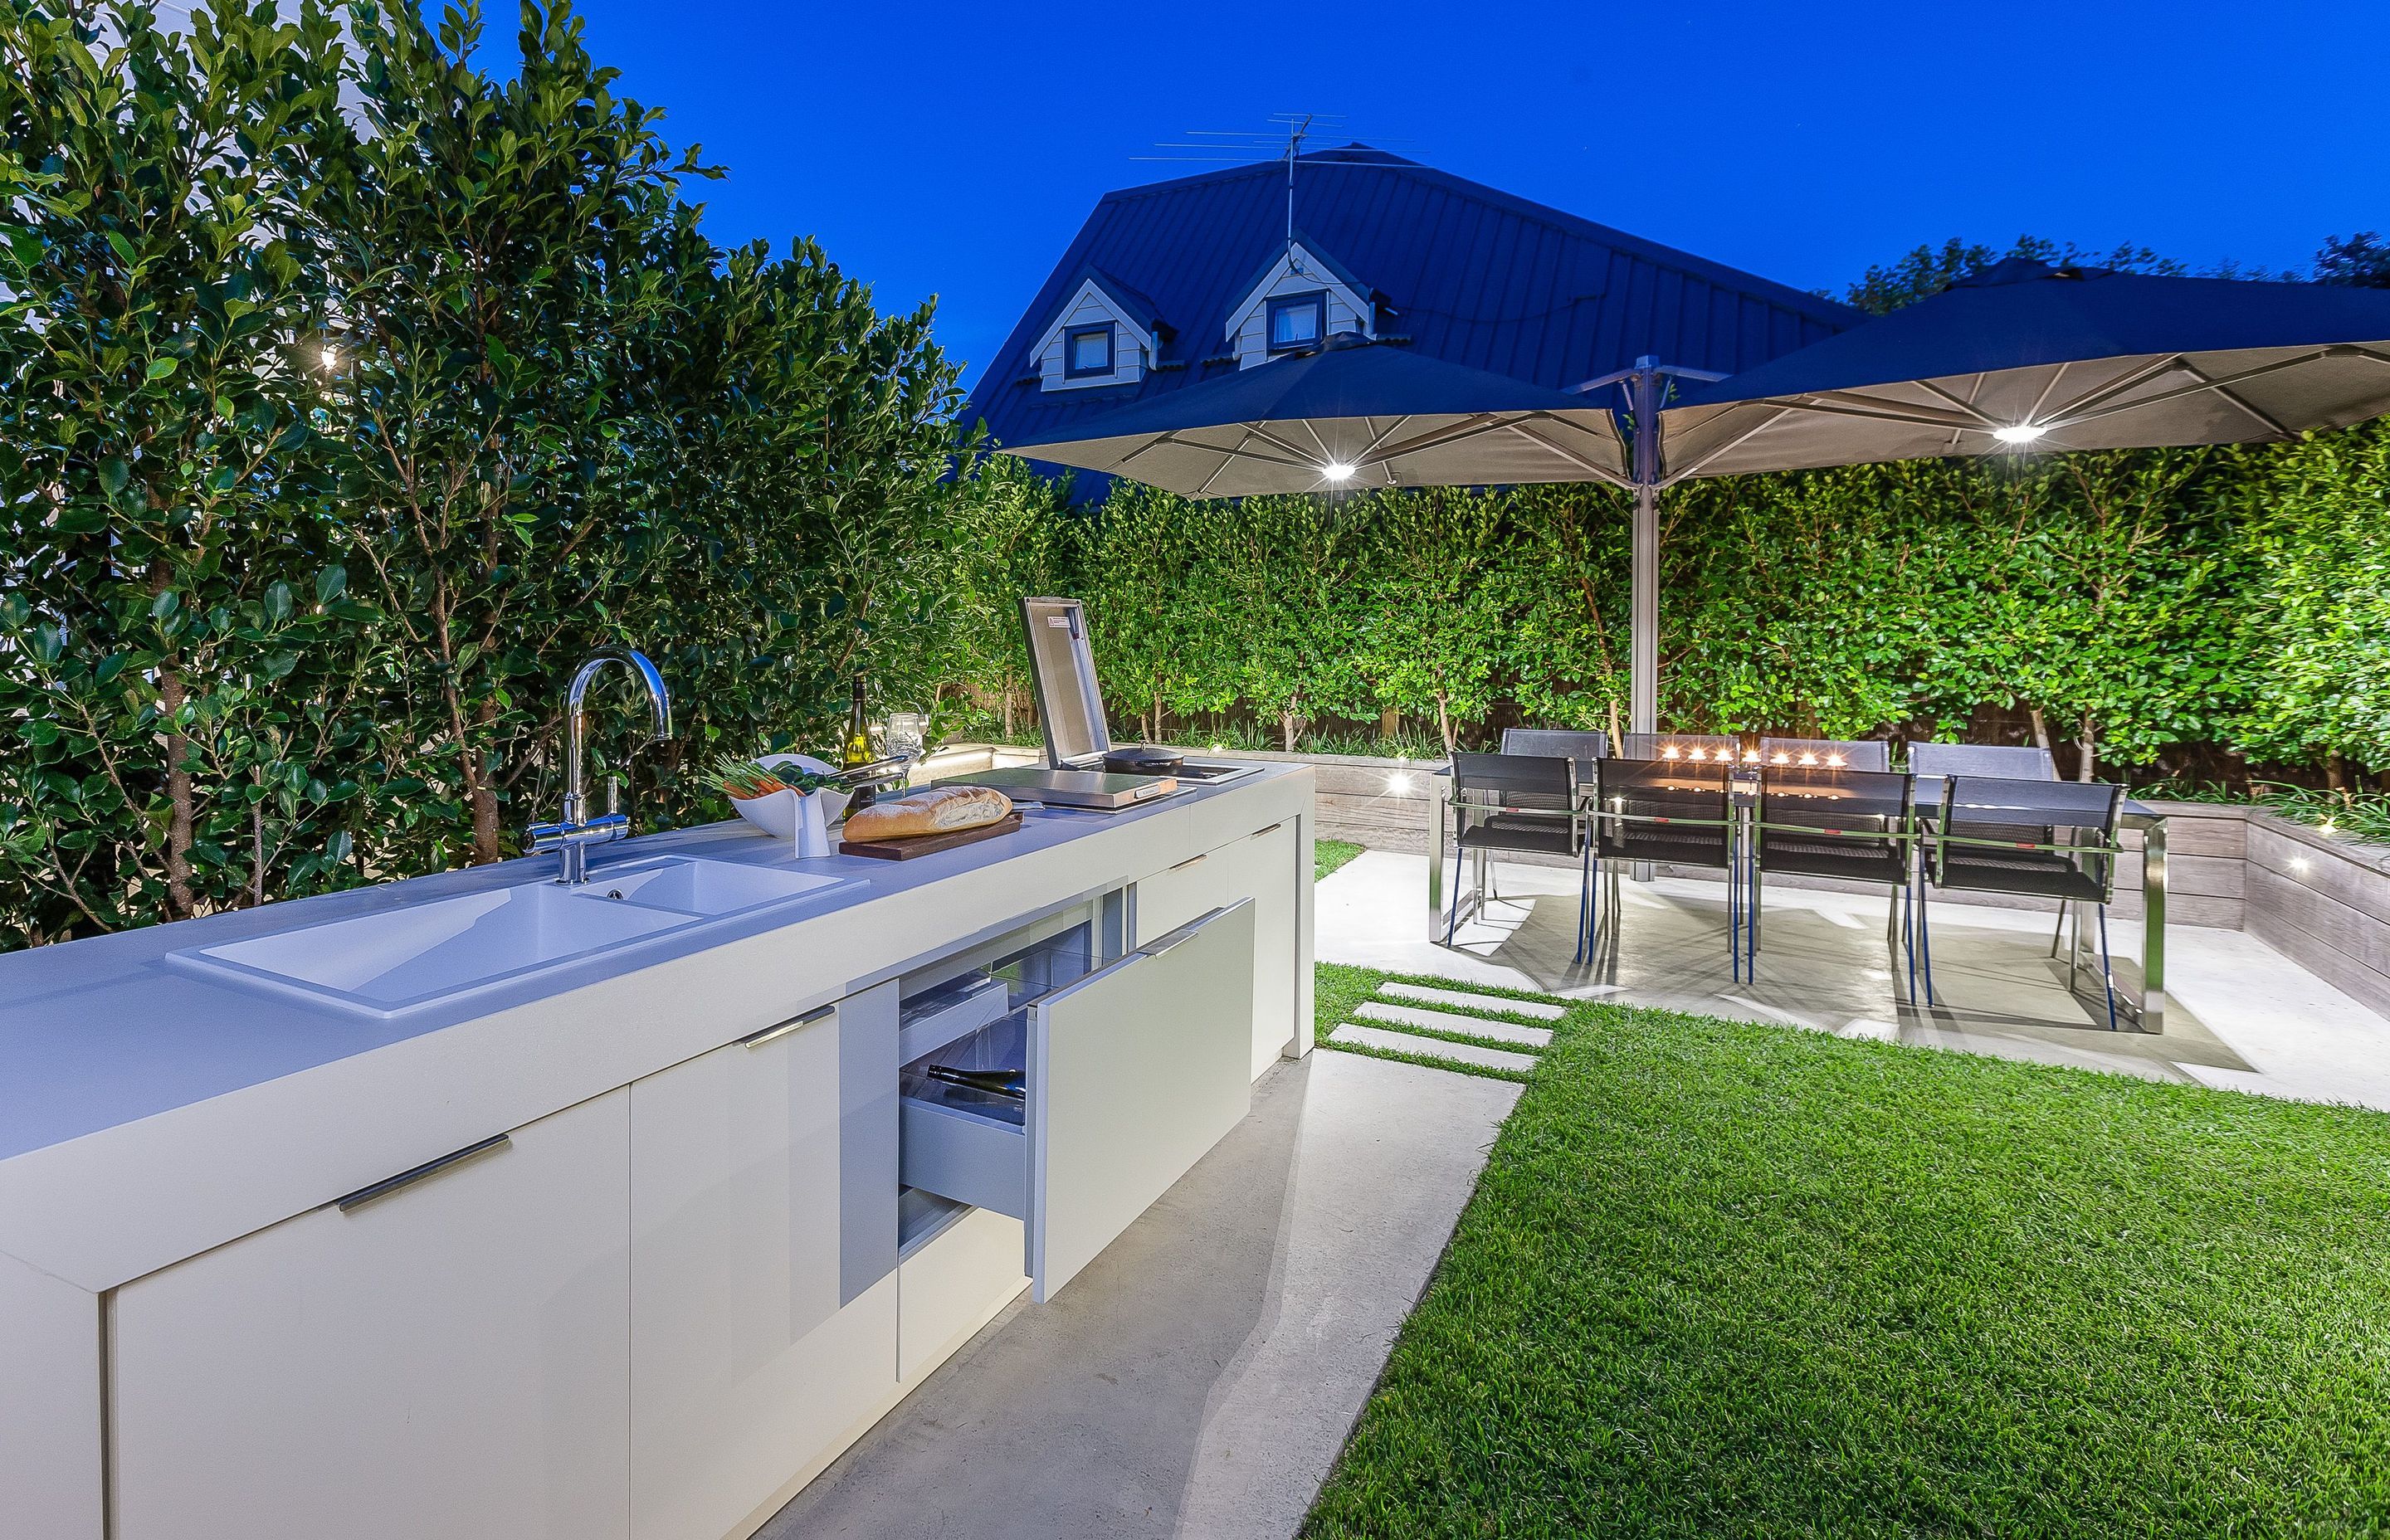 Outdoor Kitchen Units complement the lushness of your yard